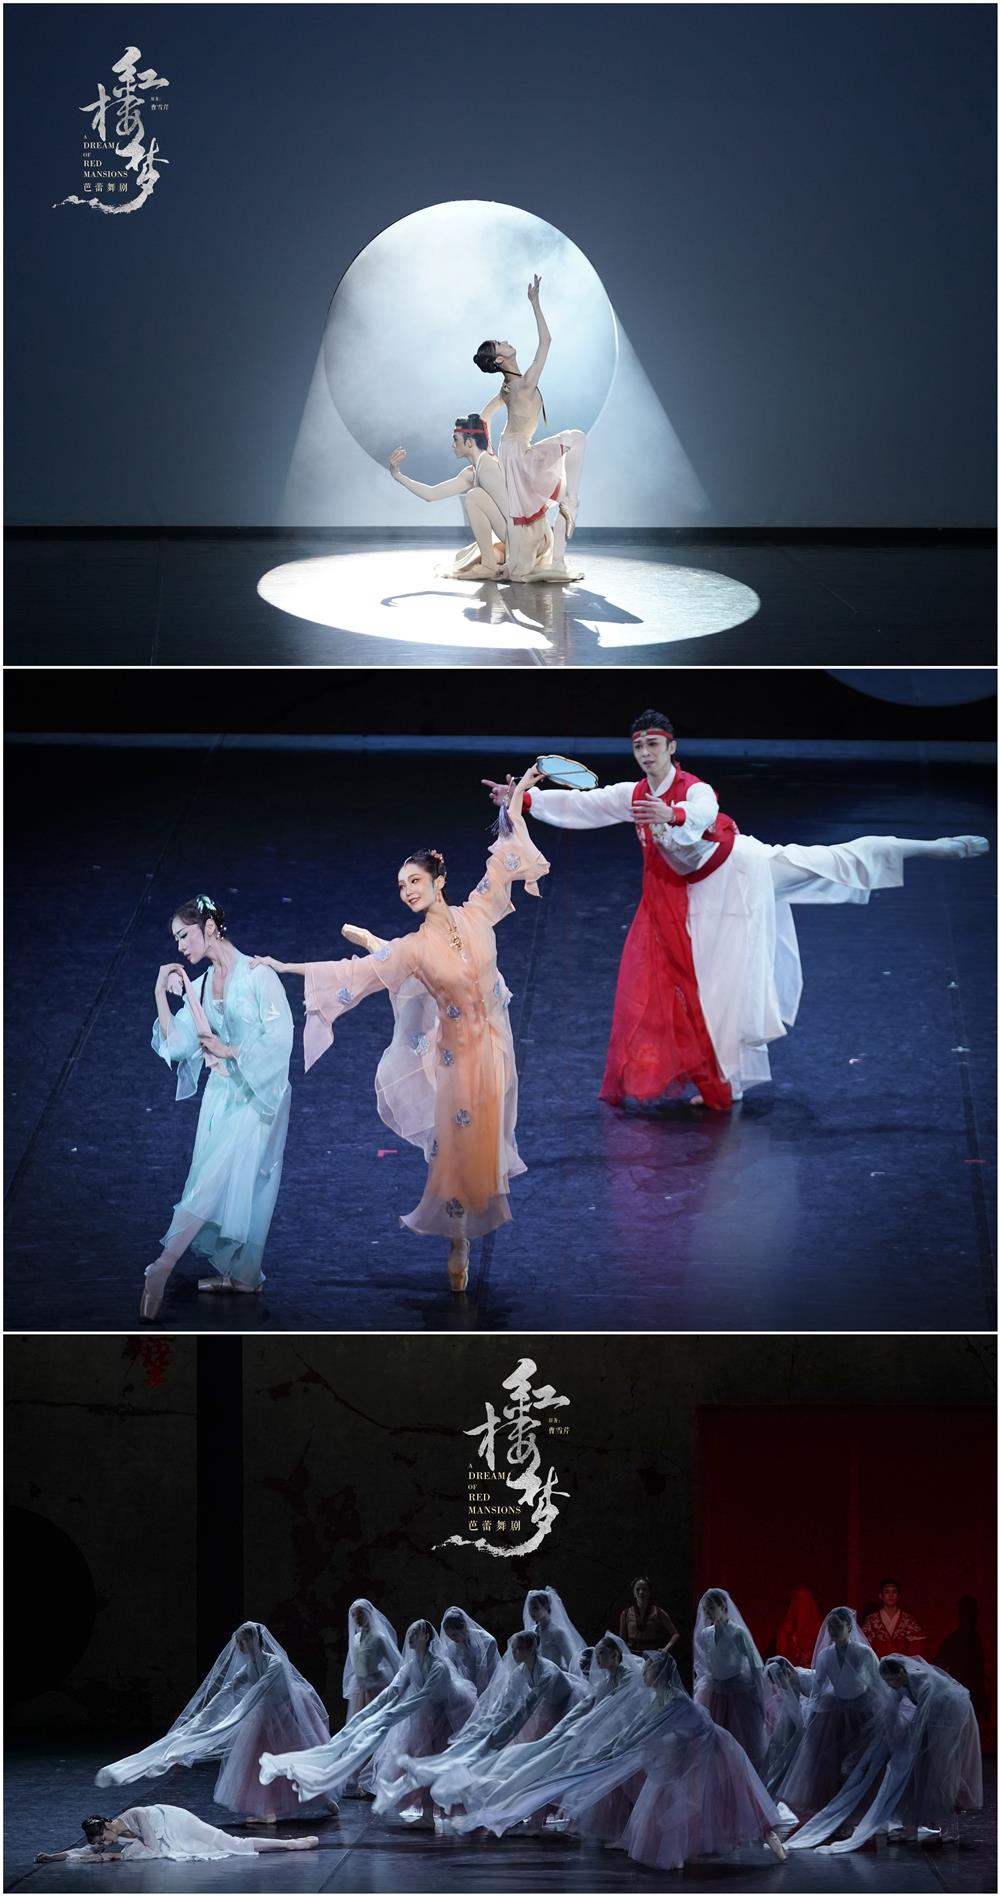 "Dream of the Red Chamber" and "Little Mermaid" make their debut, and celebrity dancers embark on the Shanghai summer performance season of Chinese ballet. Group Dance | Two | Shanghai